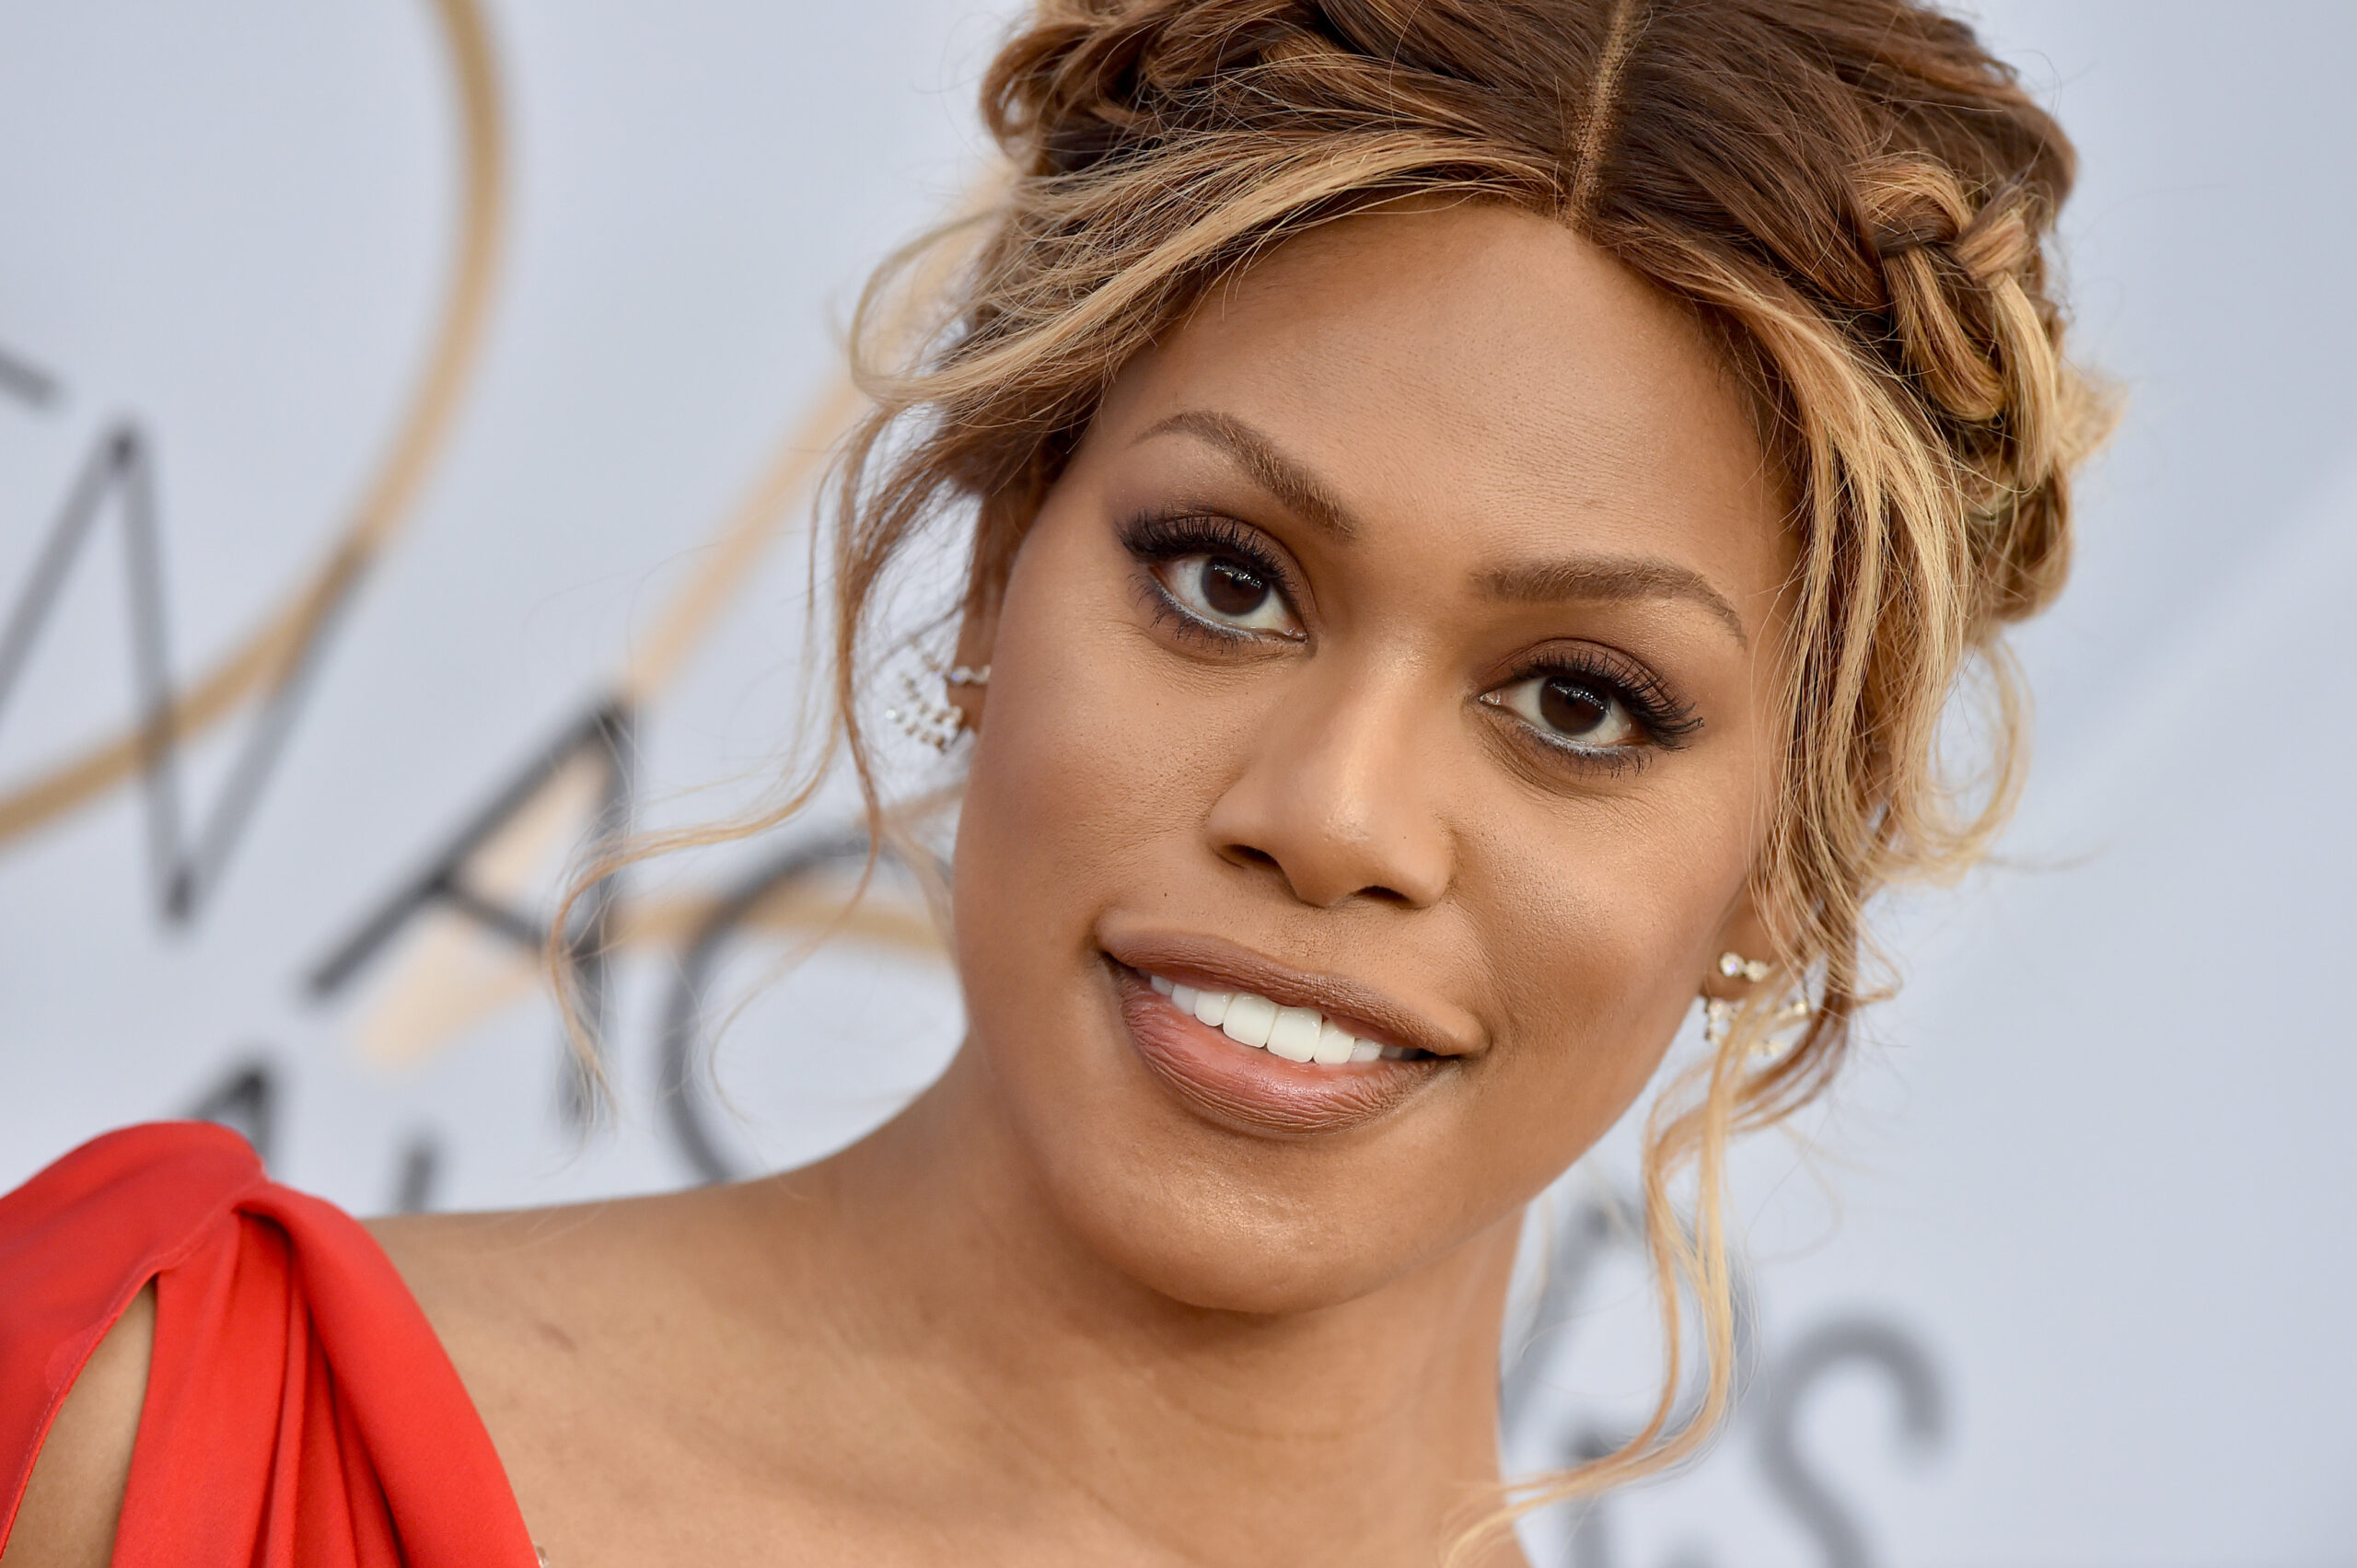 Laverne Cox 'In Shock' After Transphobic Attack in L.A.